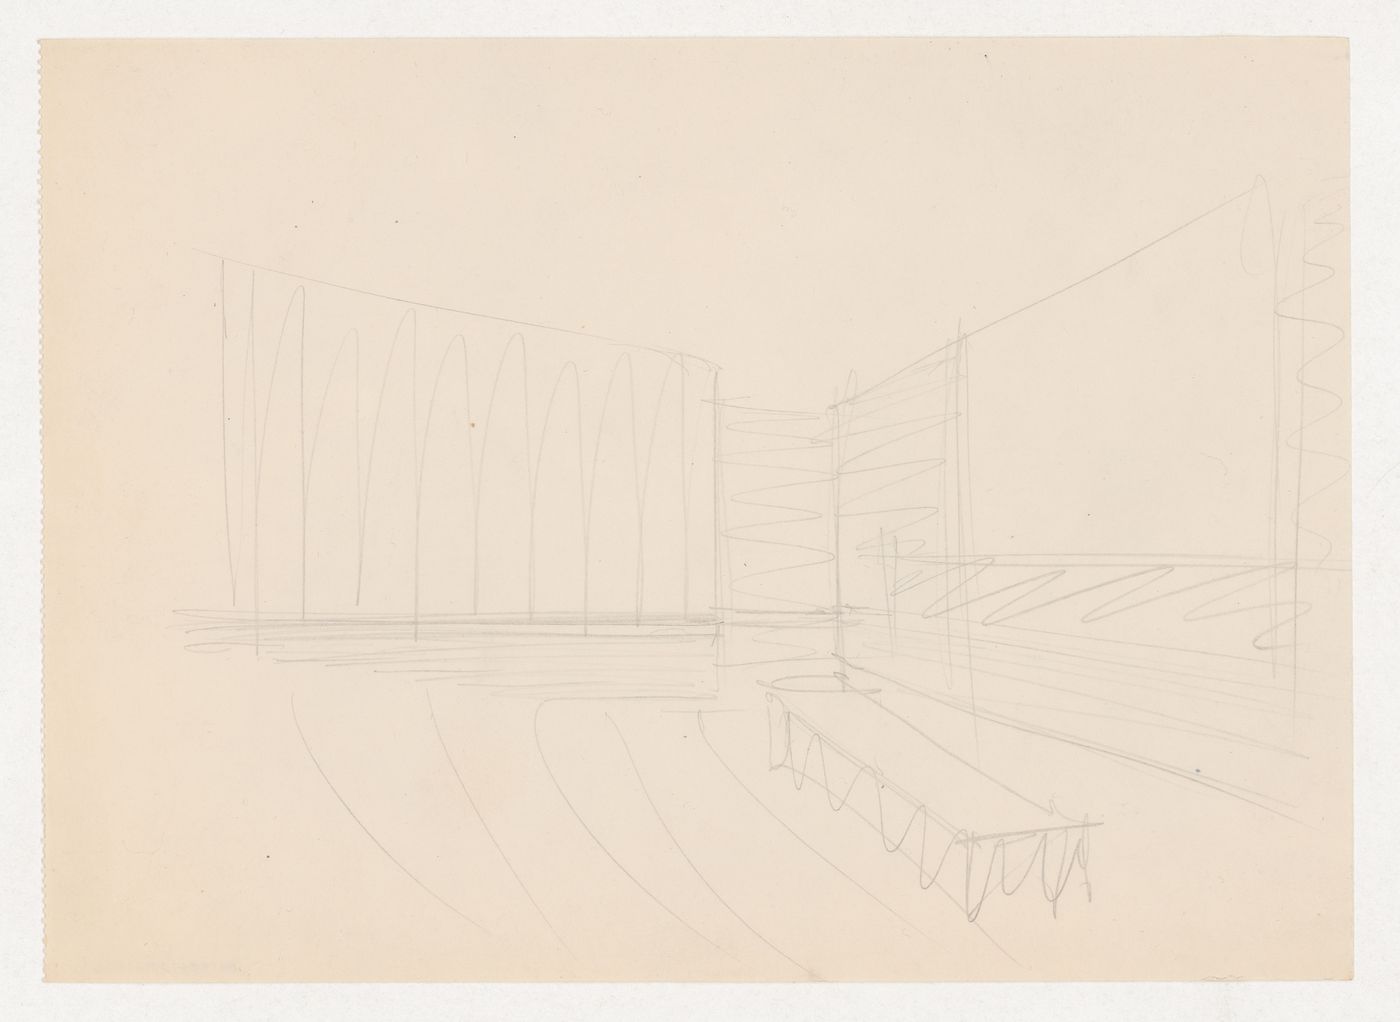 Interior perspective sketch for an auditorium, showing lectern and screen, for the Metallurgy Building, Illinois Institute of Technology, Chicago